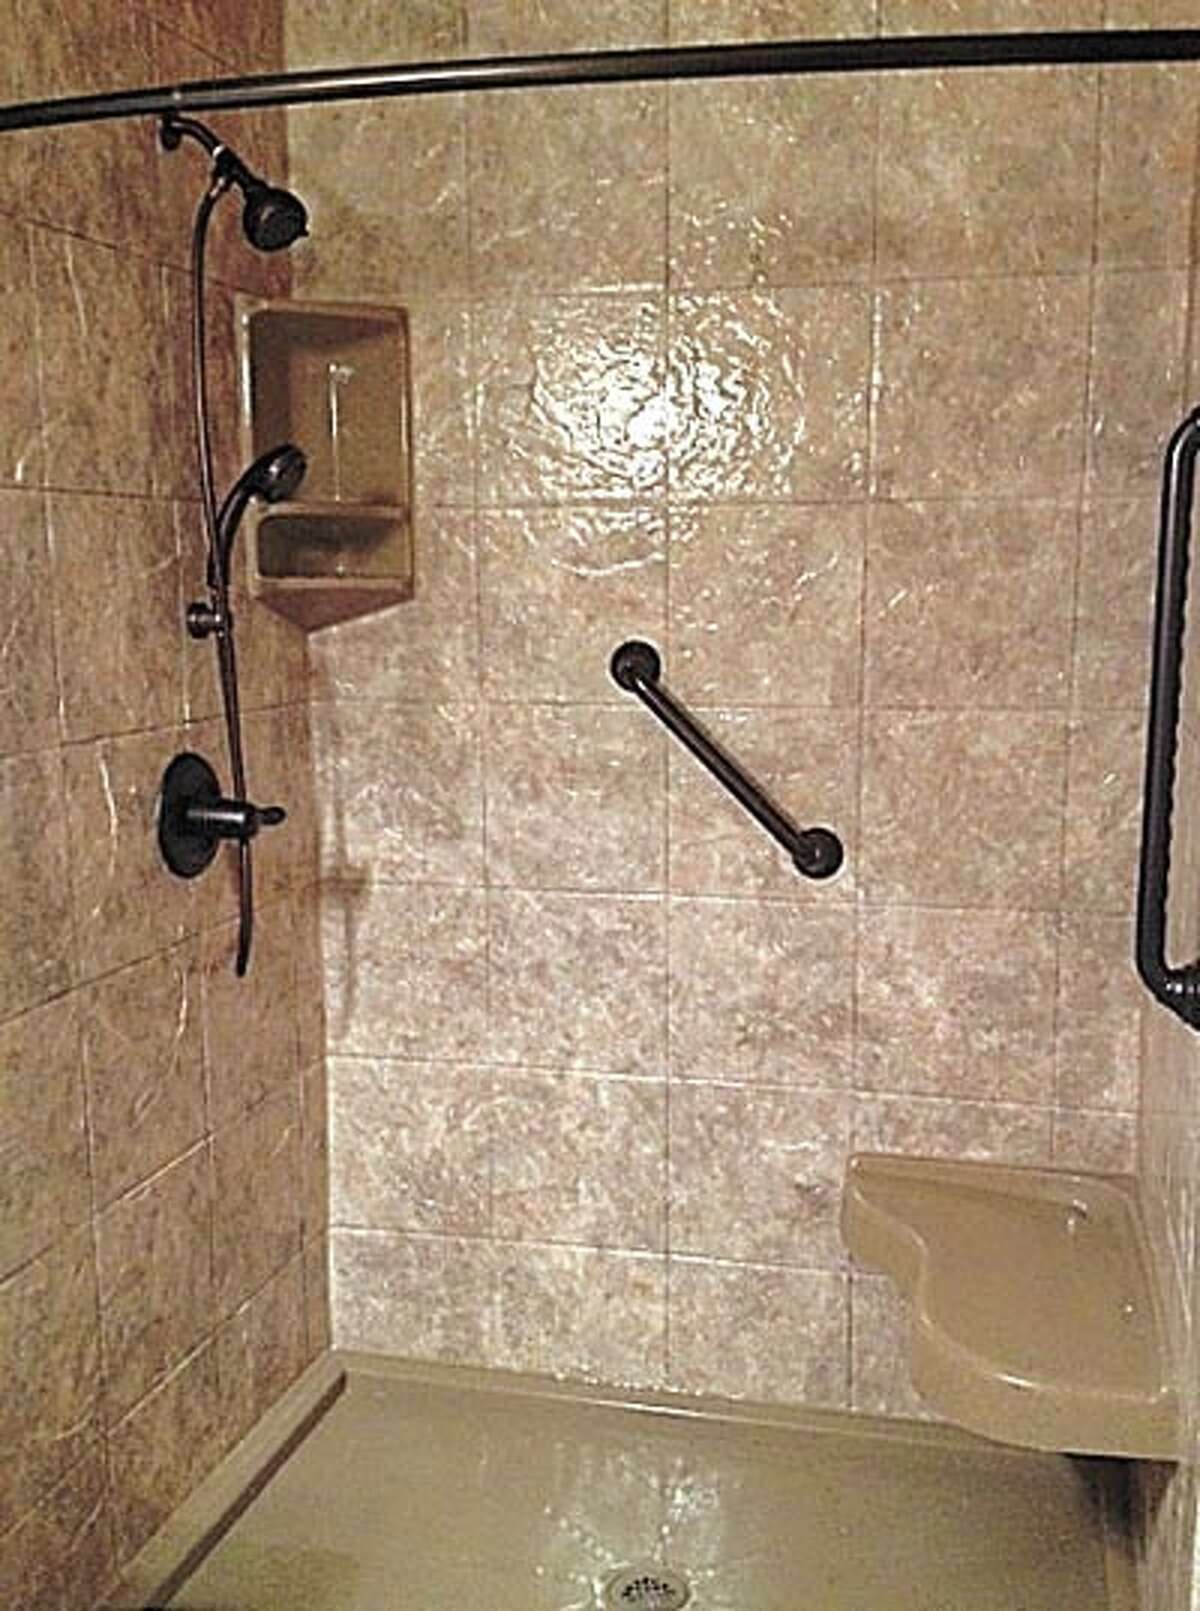 Homeowners Marco and Andrea Montes “absolutely love” the job Luxury Bath did in their shower. Call Luxury Bath now, at 218-6448 to schedule your bath beautification for next year.